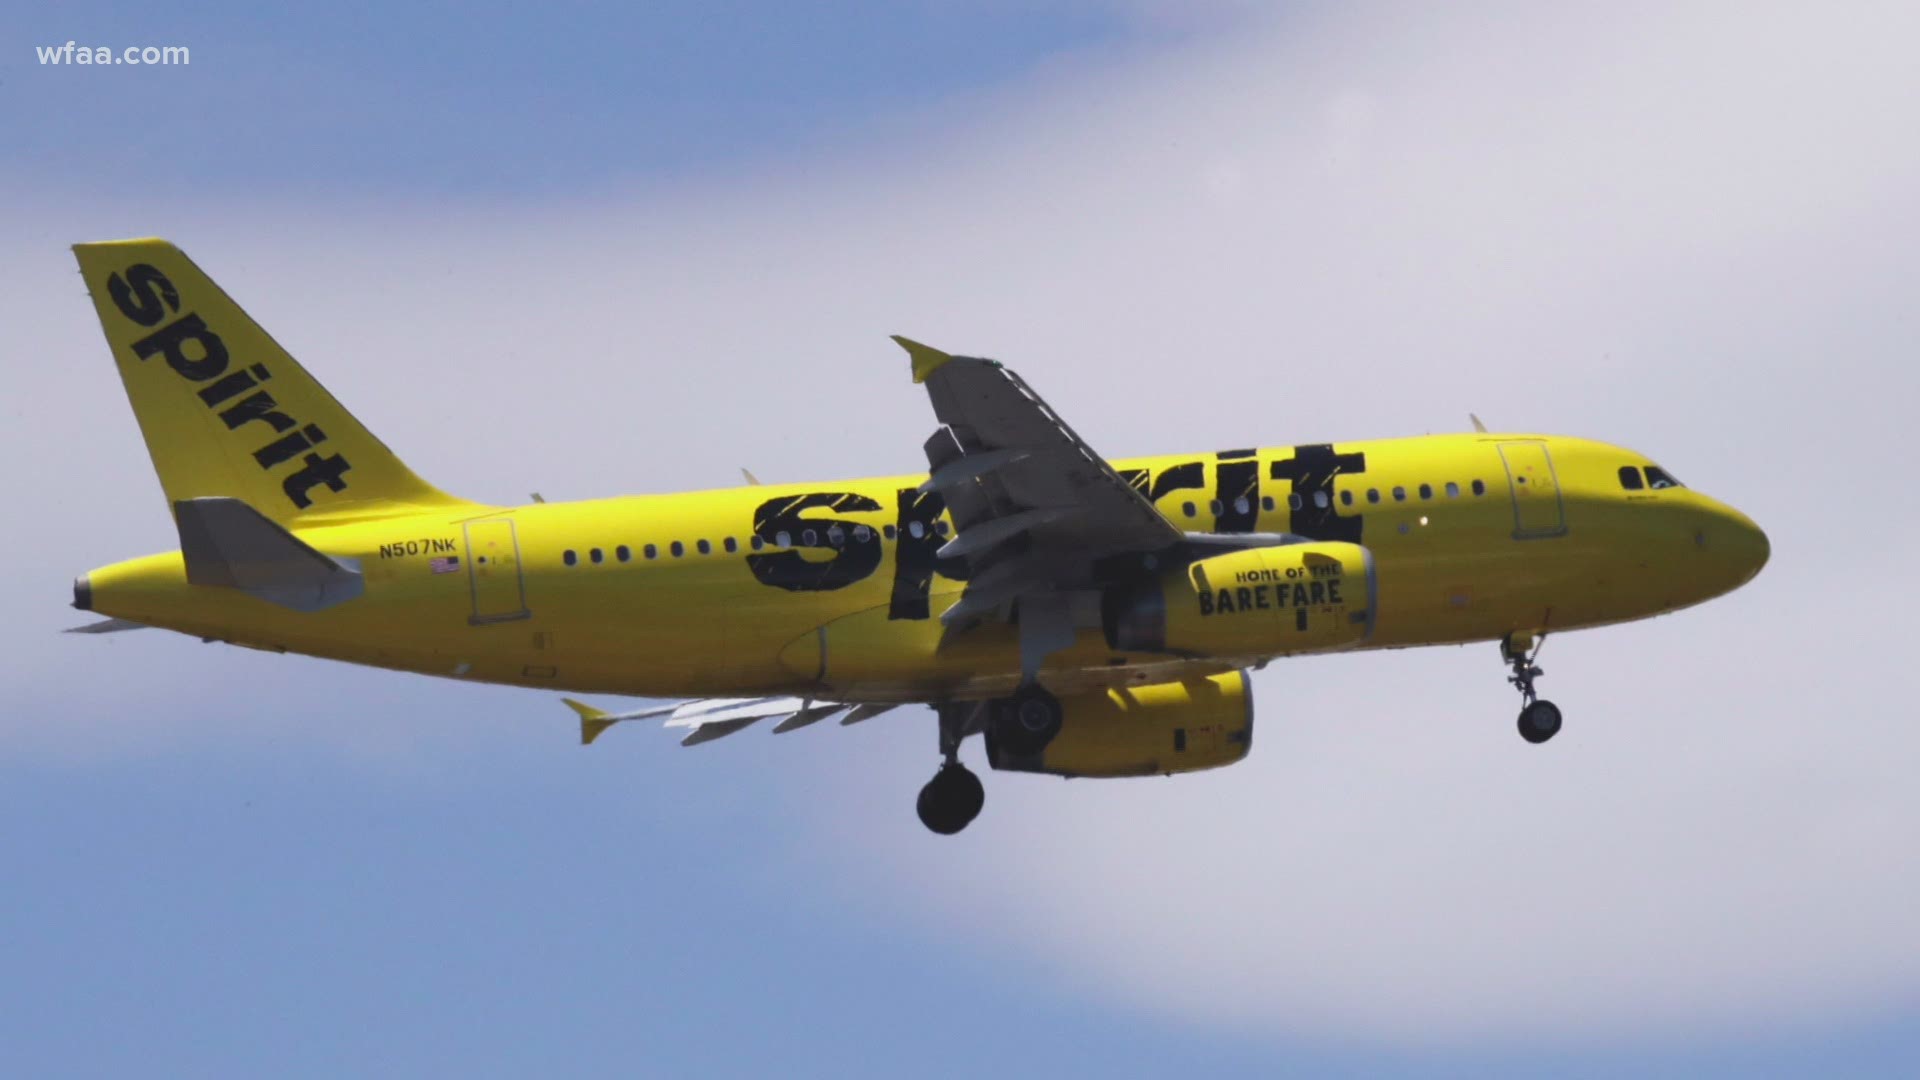 On July 24, a Spirit Airlines flight diverted to New Mexico after a woman onboard was reported unresponsive, Sunport officials confirmed.